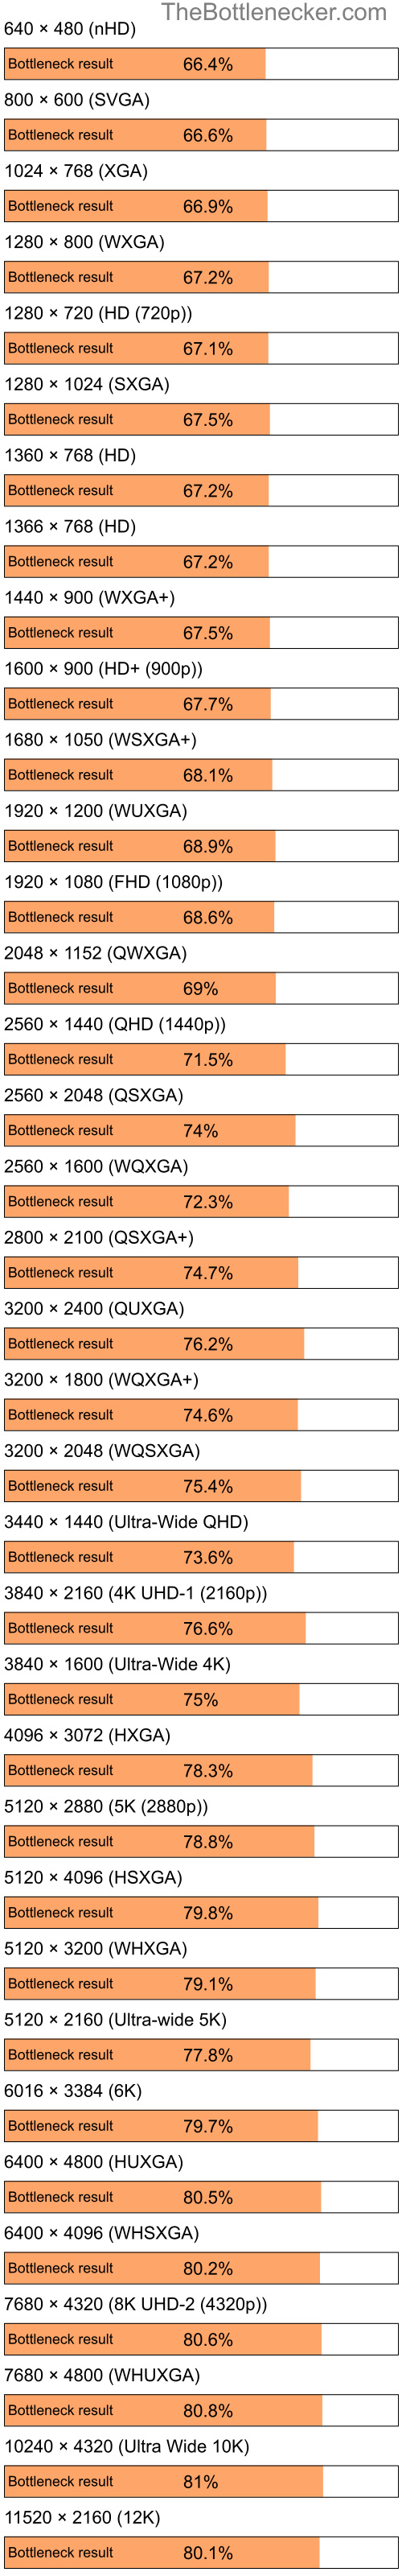 Bottleneck results by resolution for Intel Celeron and AMD Mobility Radeon X1300 in Processor Intense Tasks